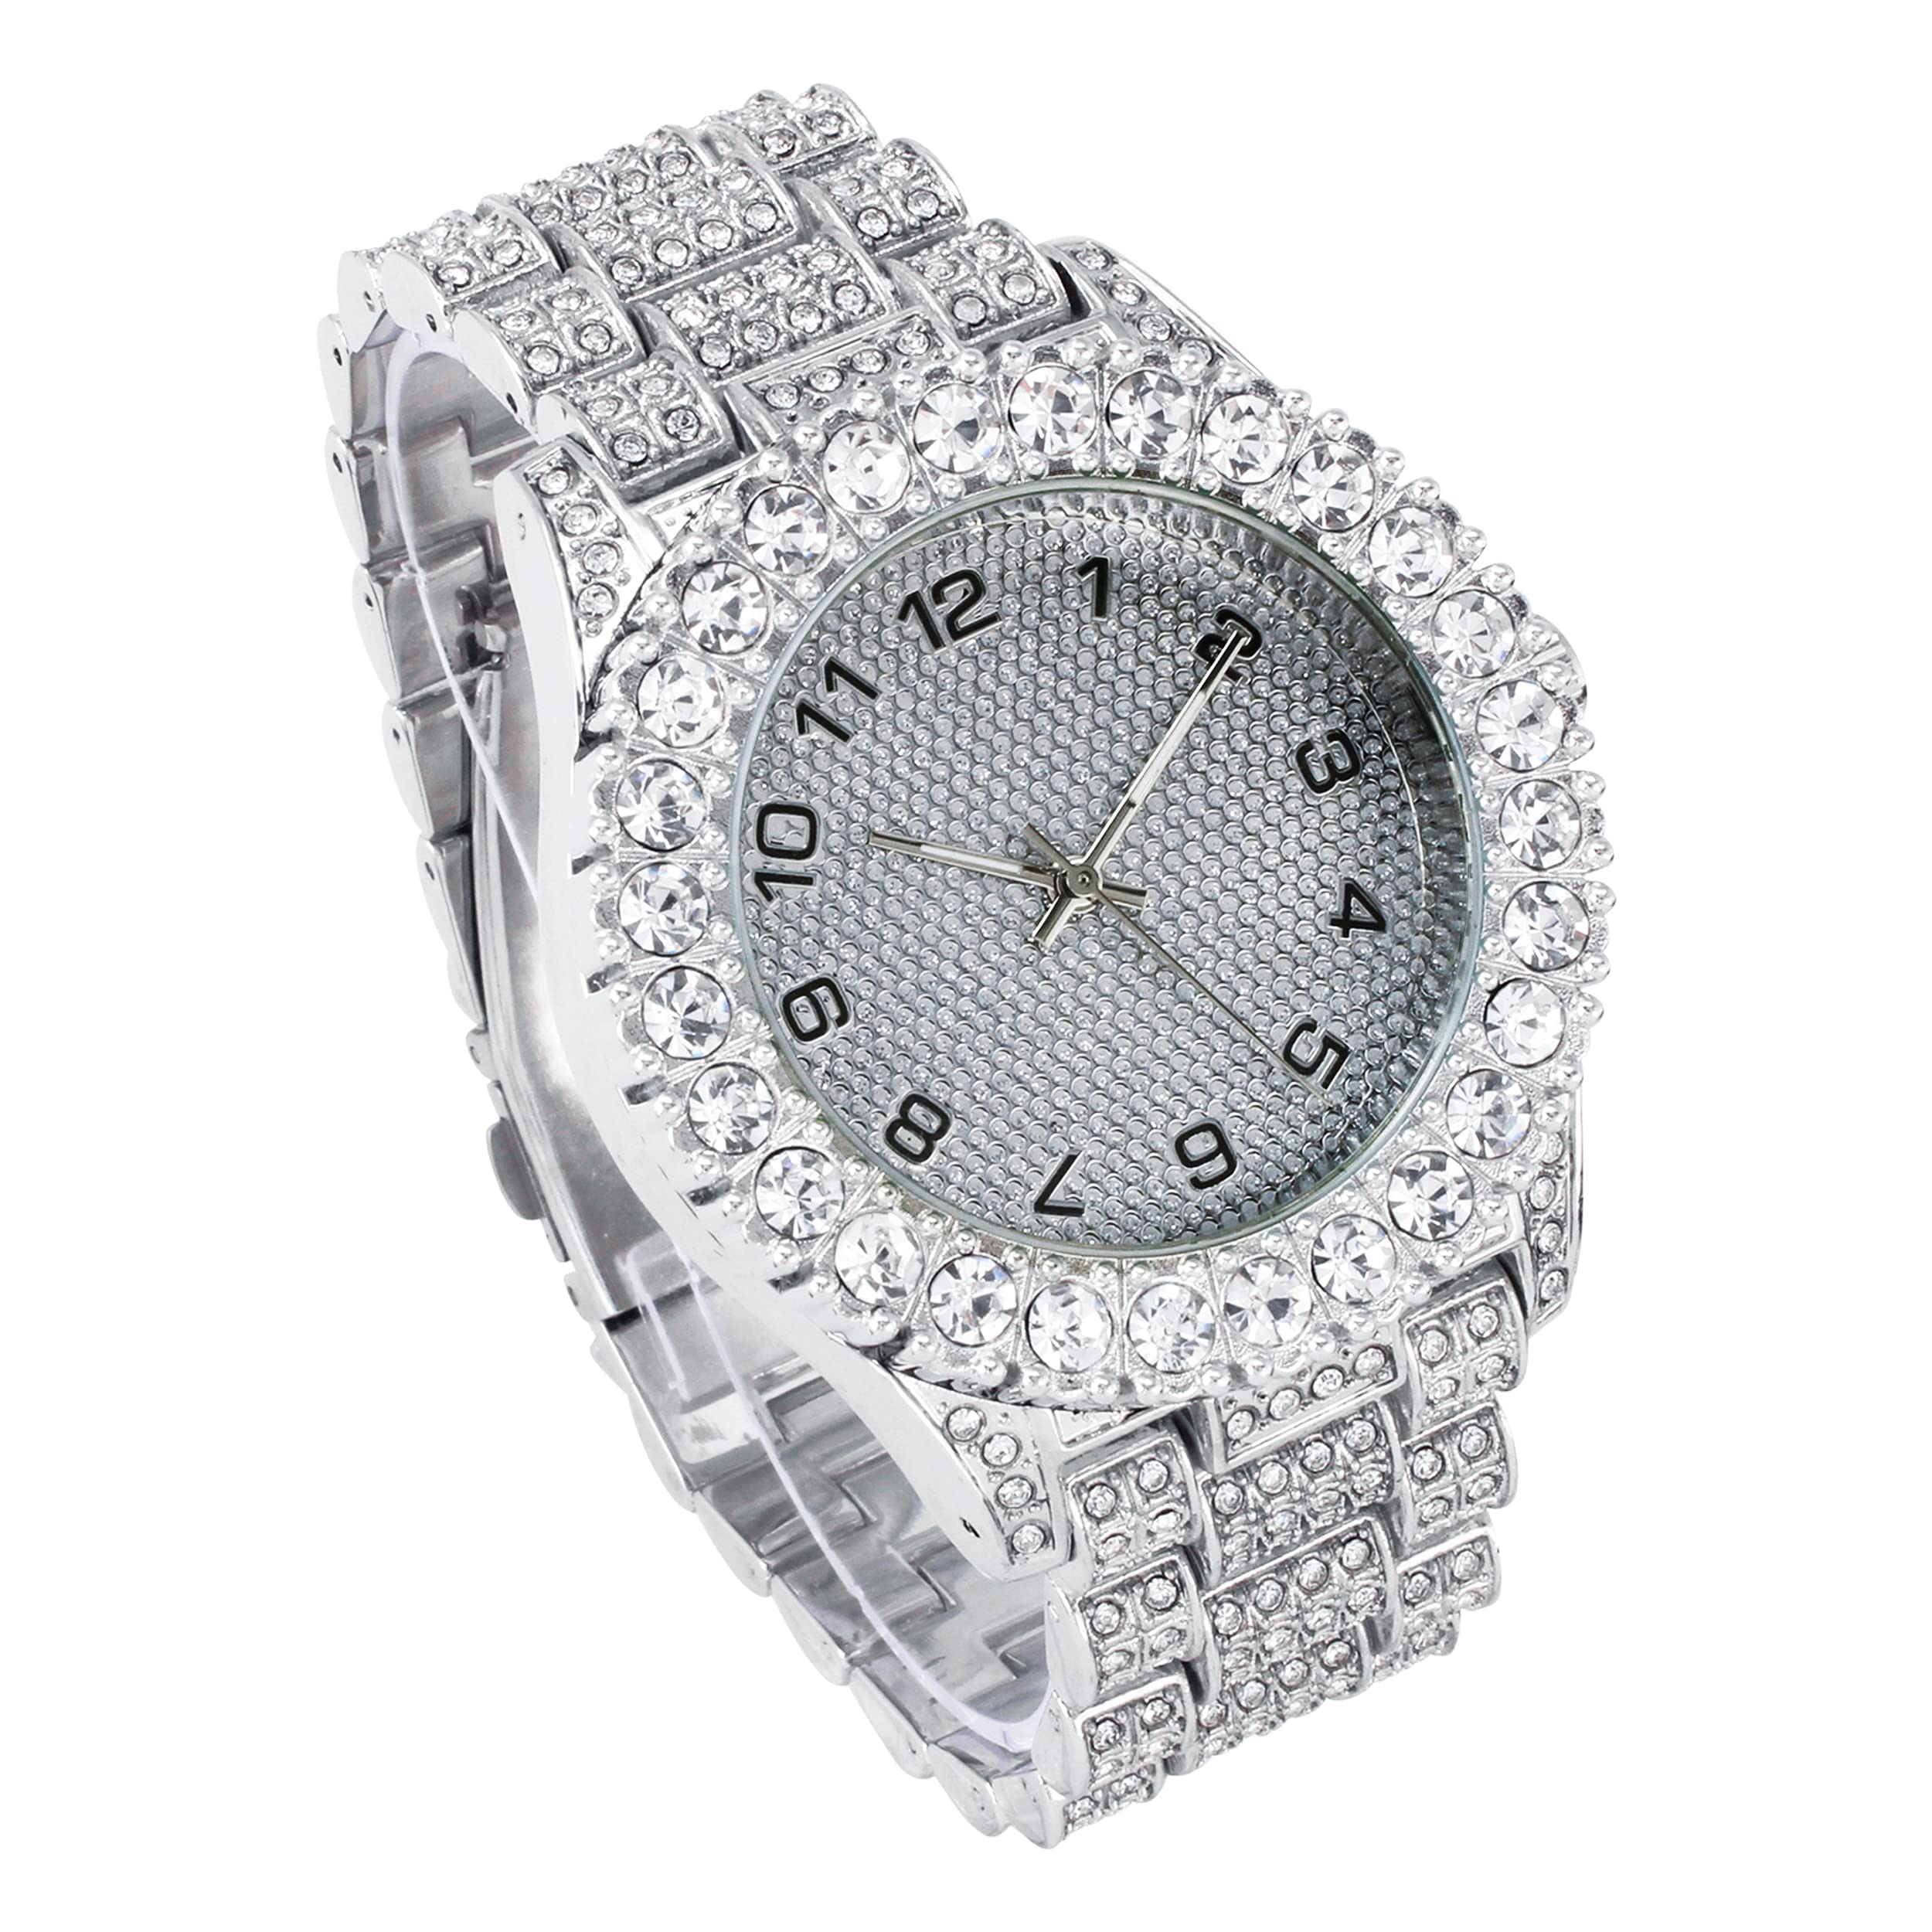 Luxury Mens 44mm Iced Diamond Solitaire Watch - Stunning Bling Dial & Bezel with Ravishing Crystals - 14k Gold, Silver, & Two-Tone Finish - Choose Numeral or Roman Dial - Watch, Bracelet & Chain Sets